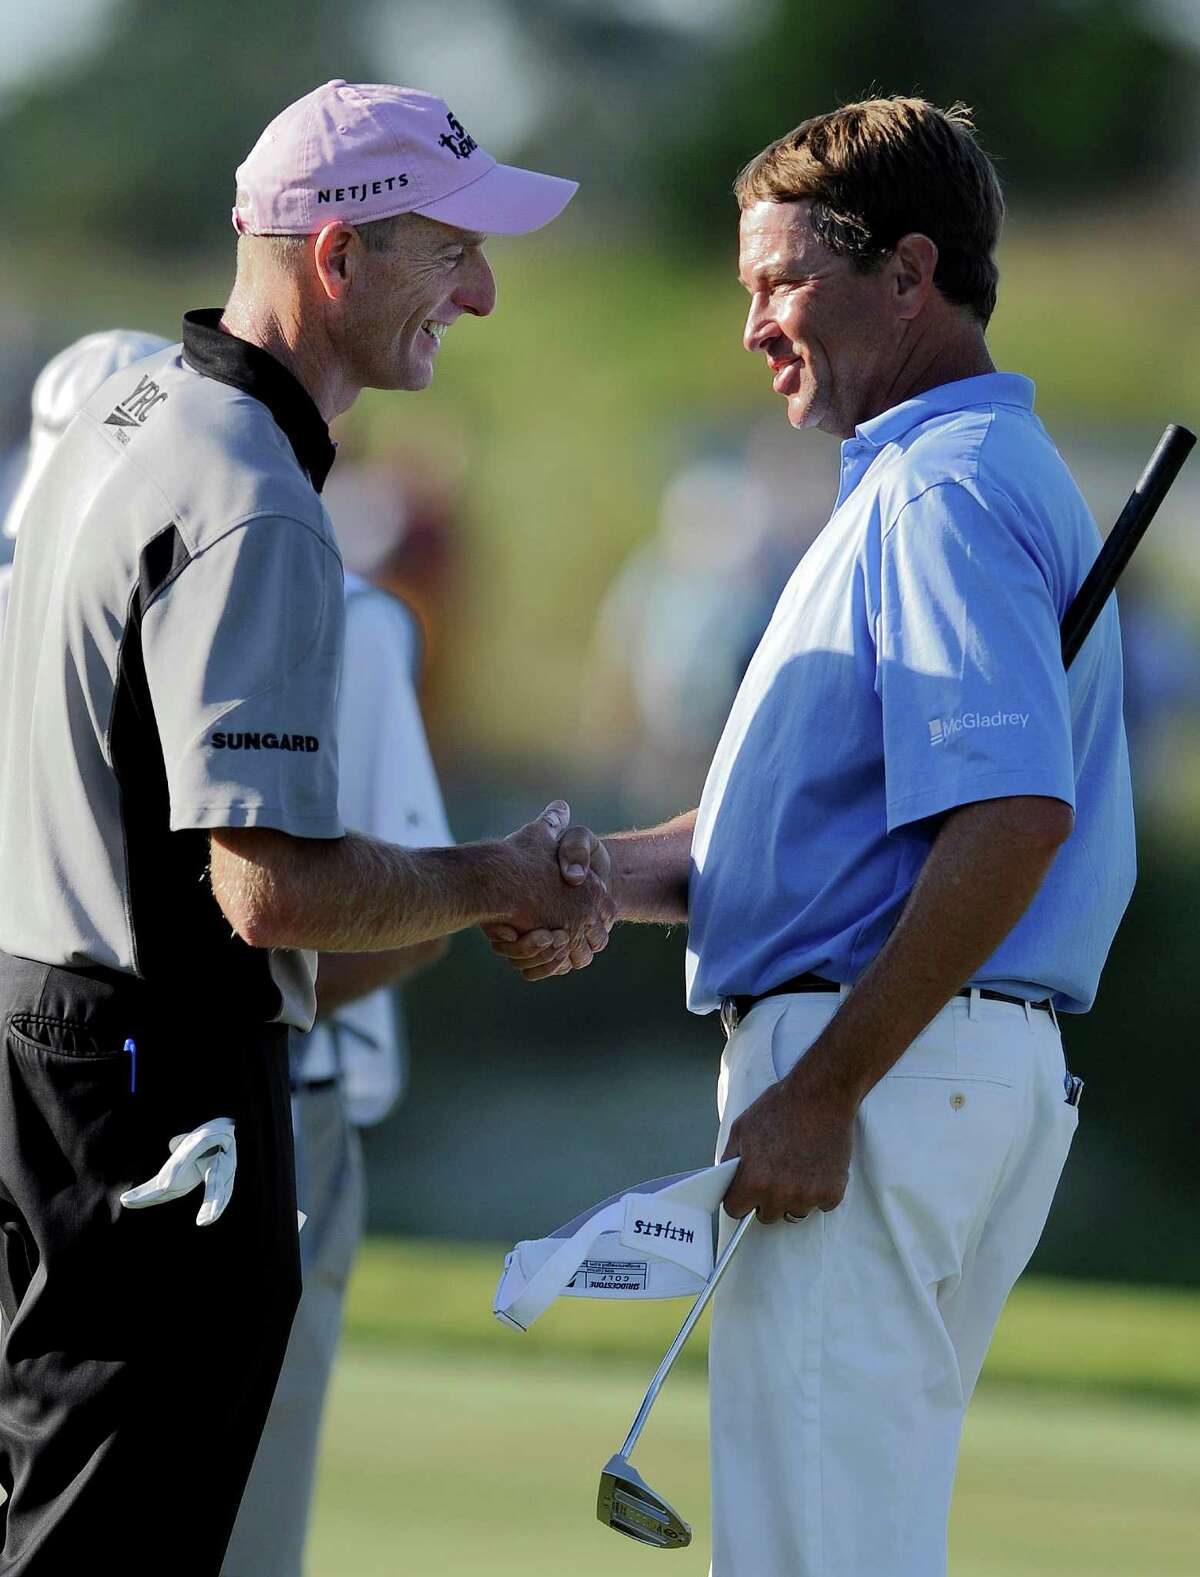 McGladrey co-leaders Davis Love III, left, and Jim Furyk will see who shakes out ahead today.